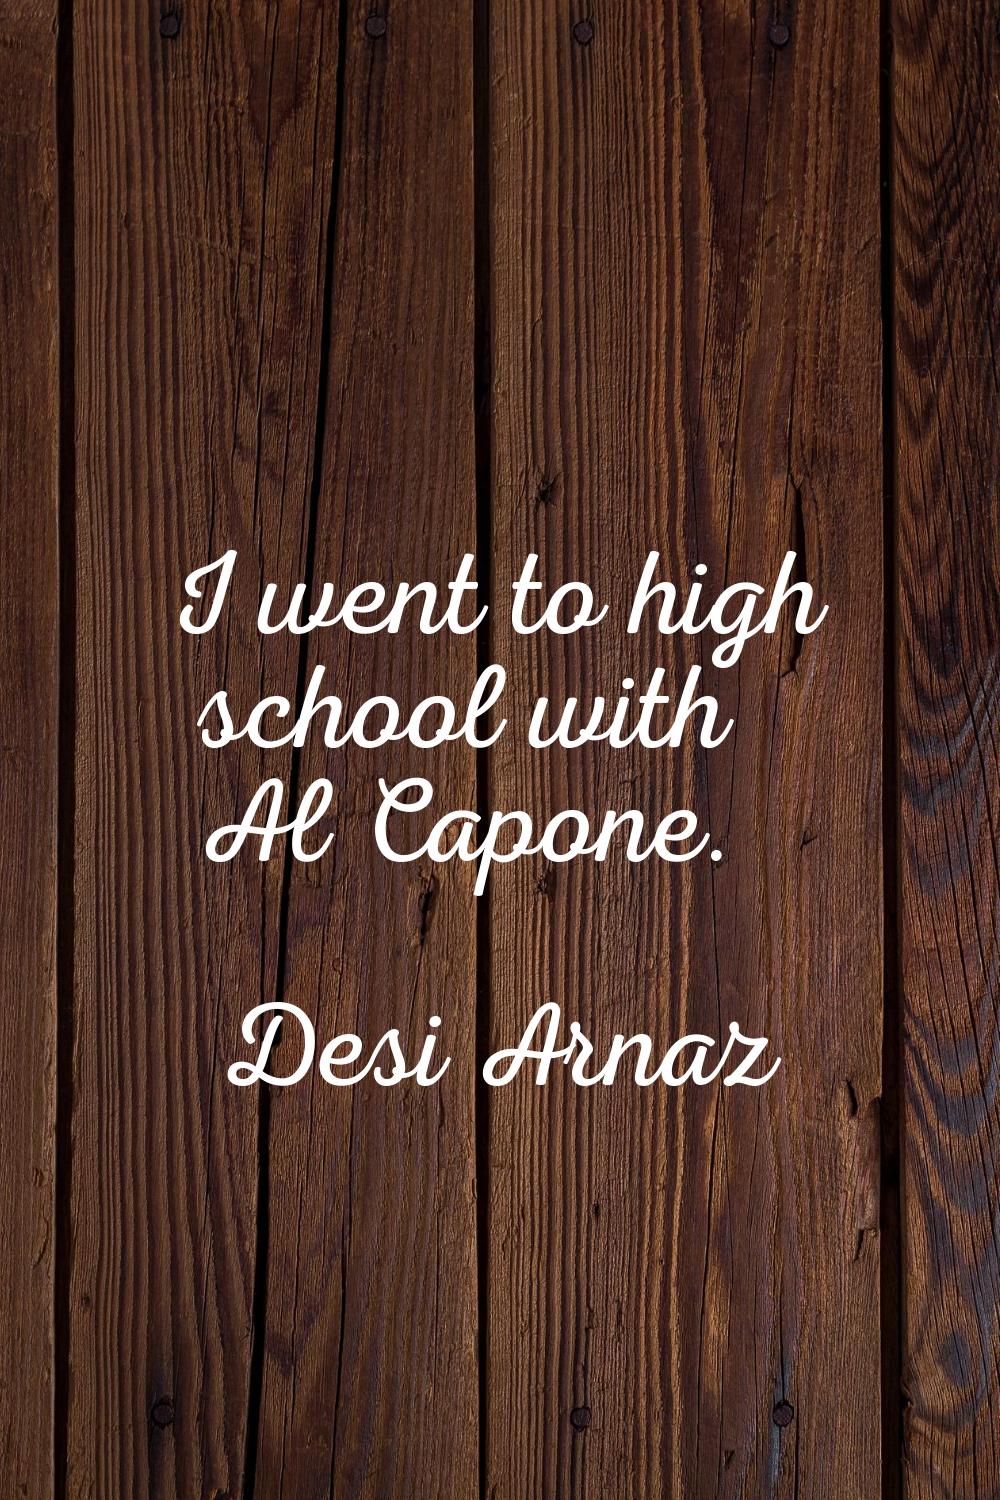 I went to high school with Al Capone.